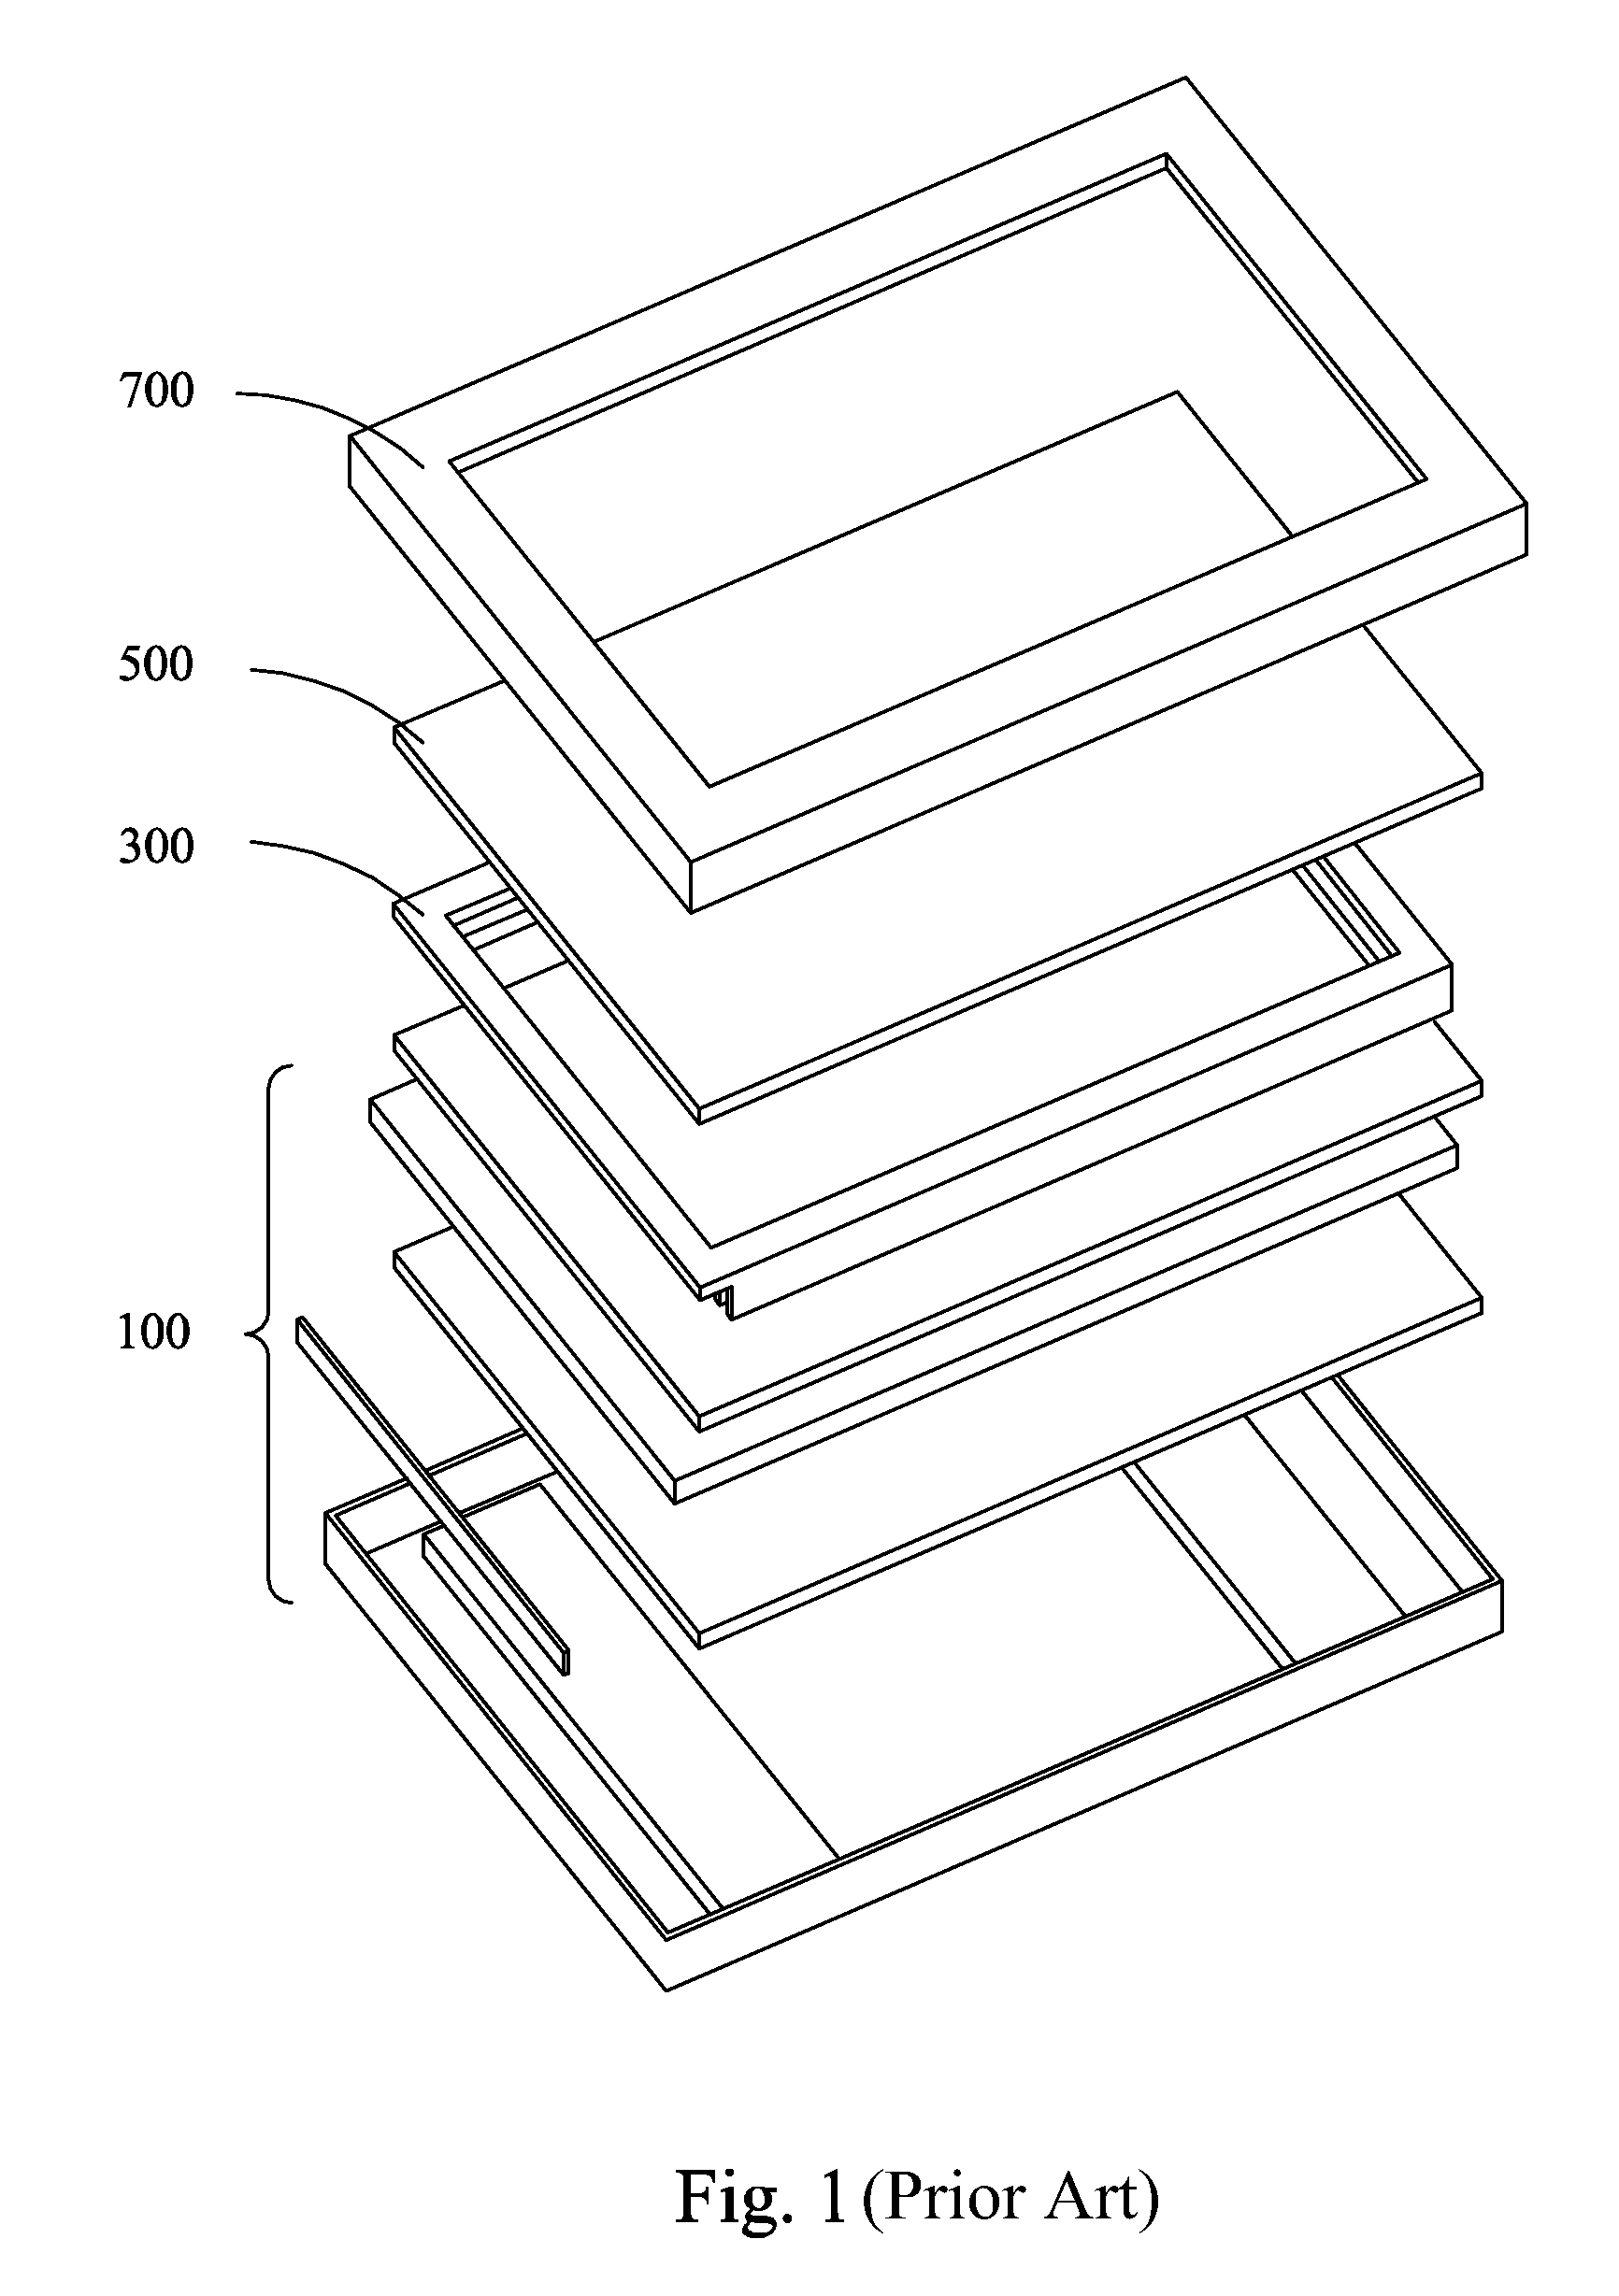 Double layer liquid crystal (LC) fabry-perot (FP) filter display device